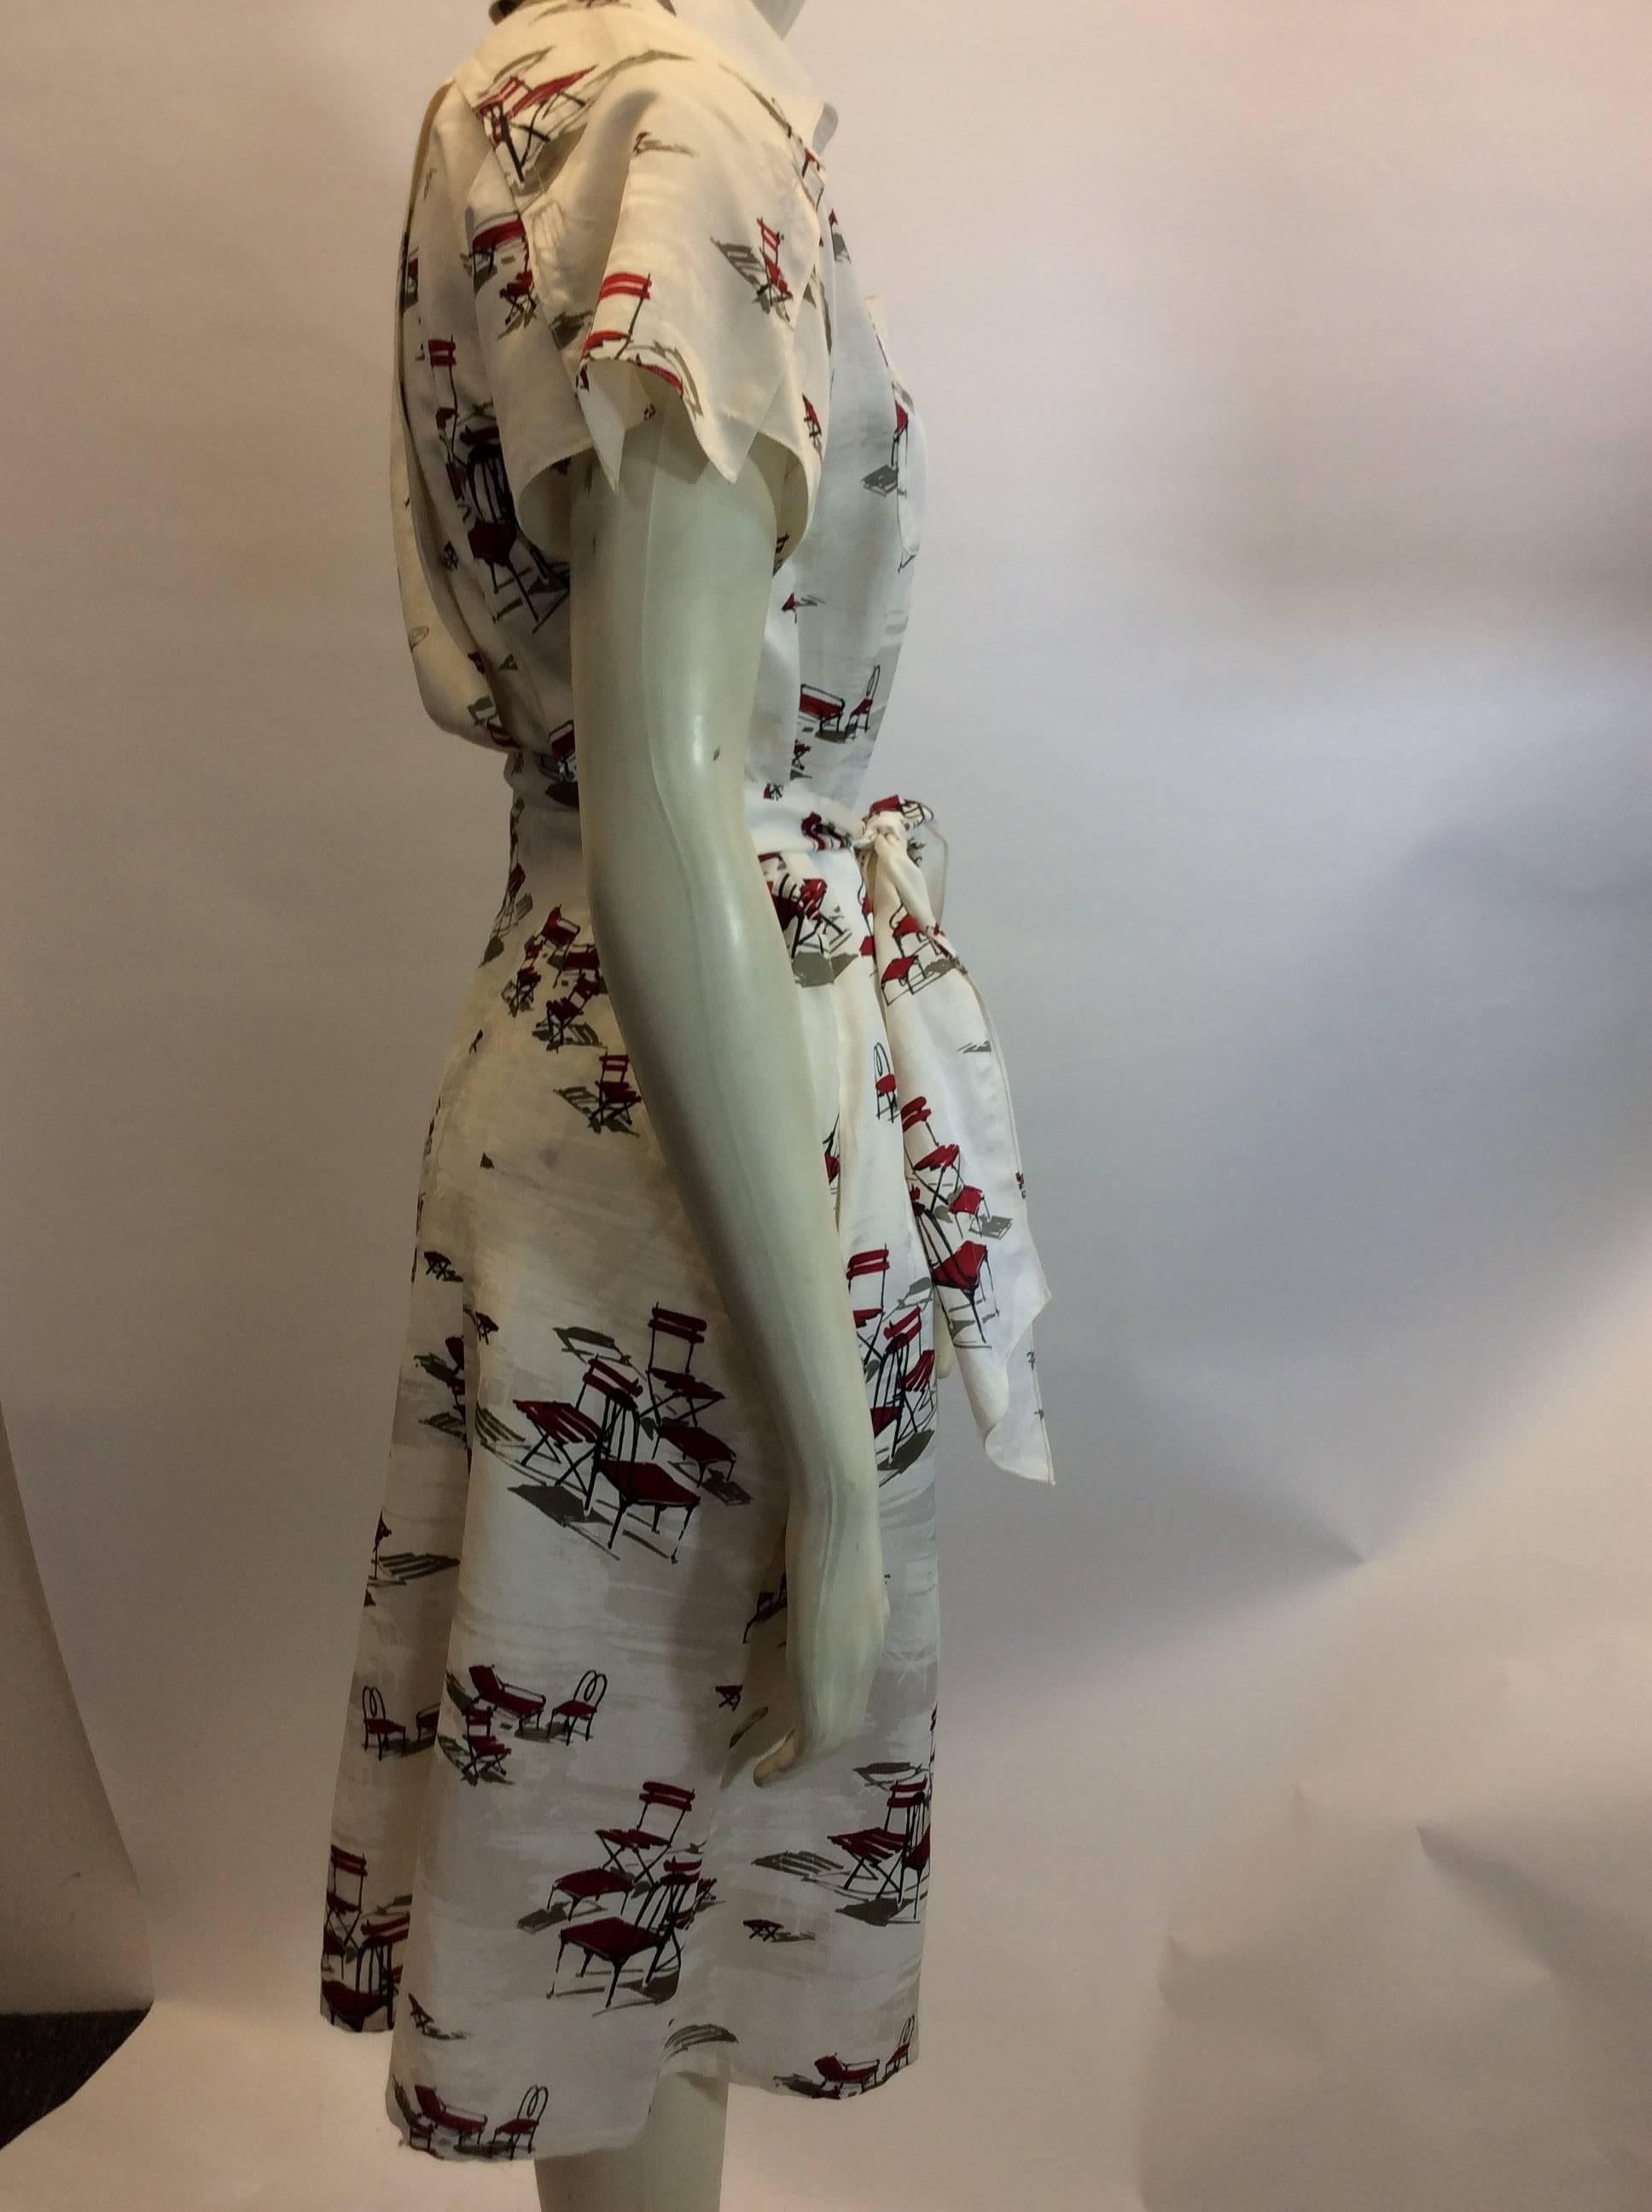 Carolina Herrera Button Down Chair Print Dress In Excellent Condition For Sale In Narberth, PA